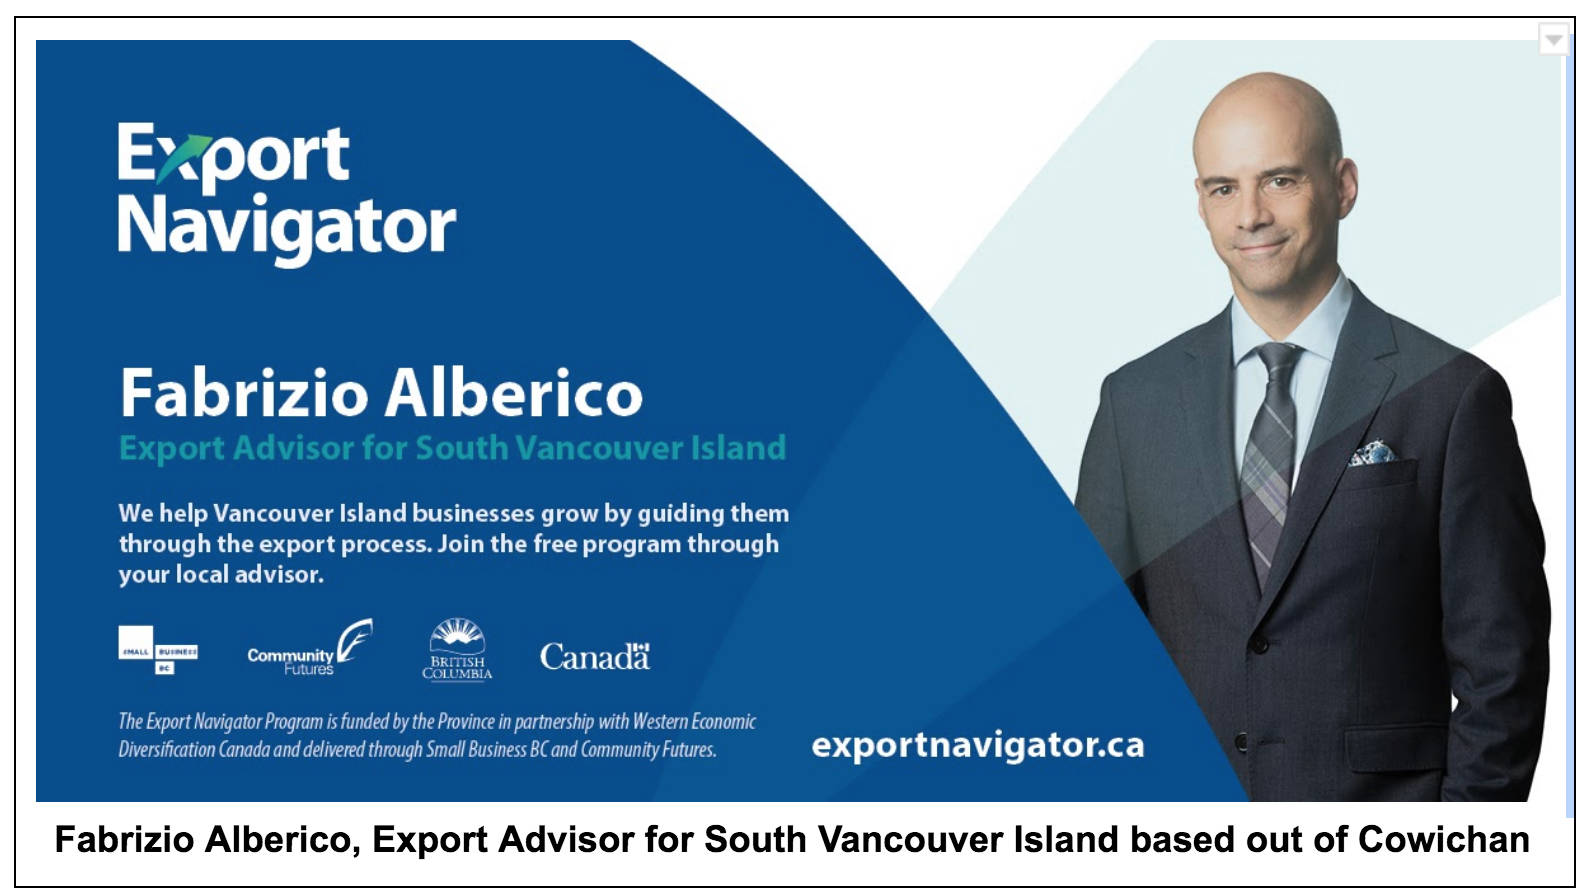 South Vancouver Island businesses achieve international success with Export Navigator